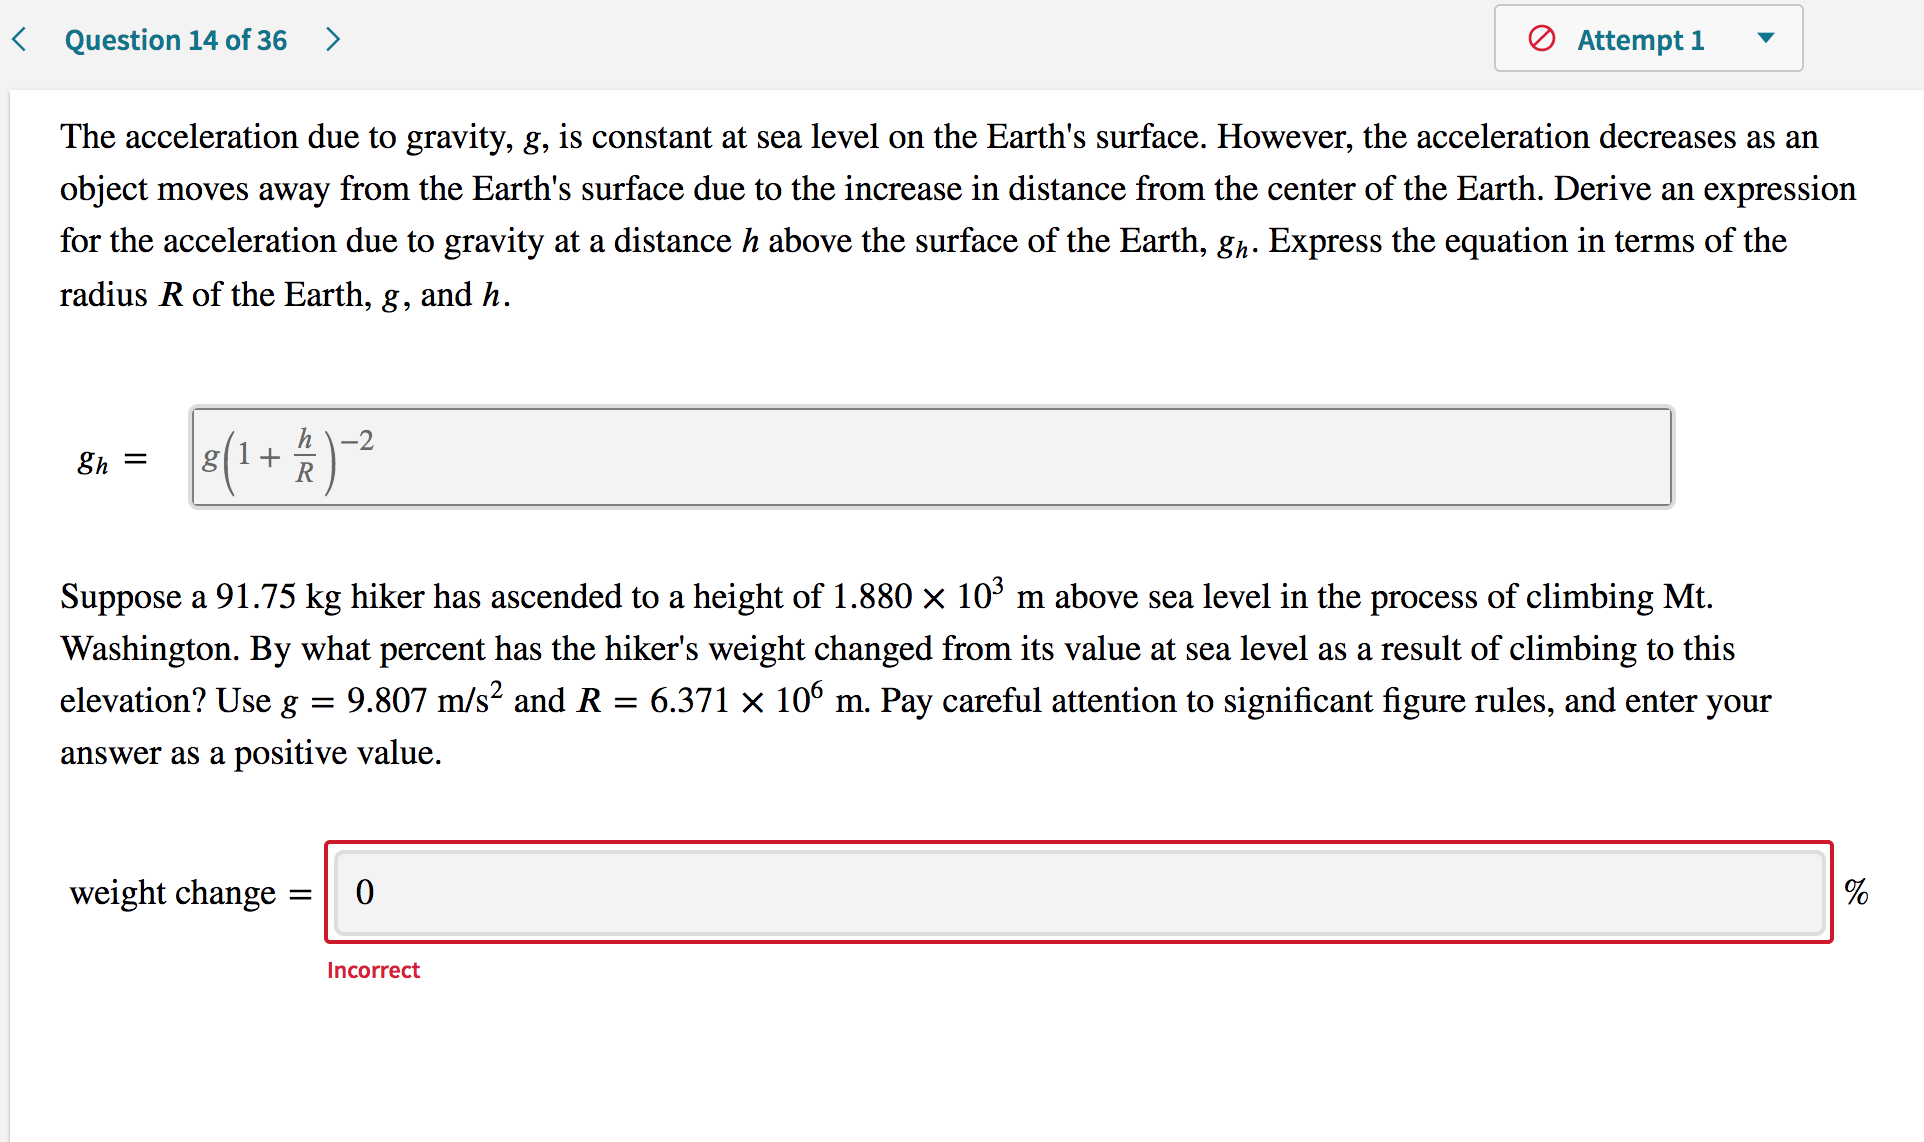 The acceleration due to gravity, g, is constant at sea level on the Earth's surface. However, the acceleration decreases as an
object moves away from the Earth's surface due to the increase in distance from the center of the Earth. Derive an expression
for the acceleration due to gravity at a distance h above the surface of the Earth, gh. Express the equation in terms of the
radius R of the Earth,
8,
and h.
(1+ )²
h\-2
8h =
Suppose a 91.75 kg hiker has ascended to a height of 1.880 x 10³ m above sea level in the process of climbing Mt.
Washington. By what percent has the hiker's weight changed from its value at sea level as a result of climbing to this
elevation? Use g
9.807 m/s? and R :
6.371 × 106 m. Pay careful attention to significant figure rules, and enter your
answer as a positive value.
